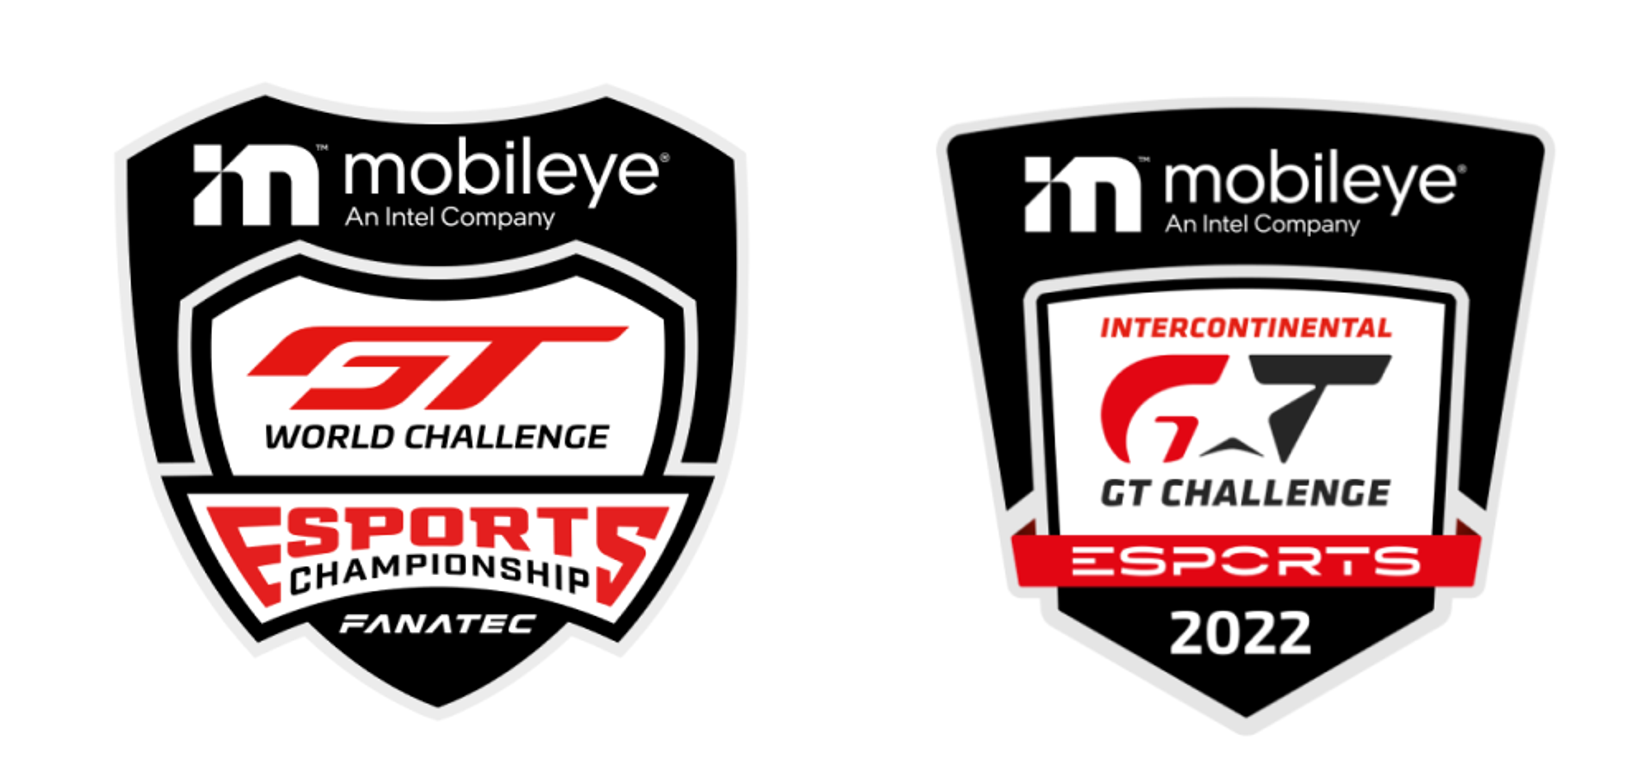 emblems for the Mobileye GT World Challenge eSports Championships and Mobileye Intercontinental GT Challenge eSports Championship